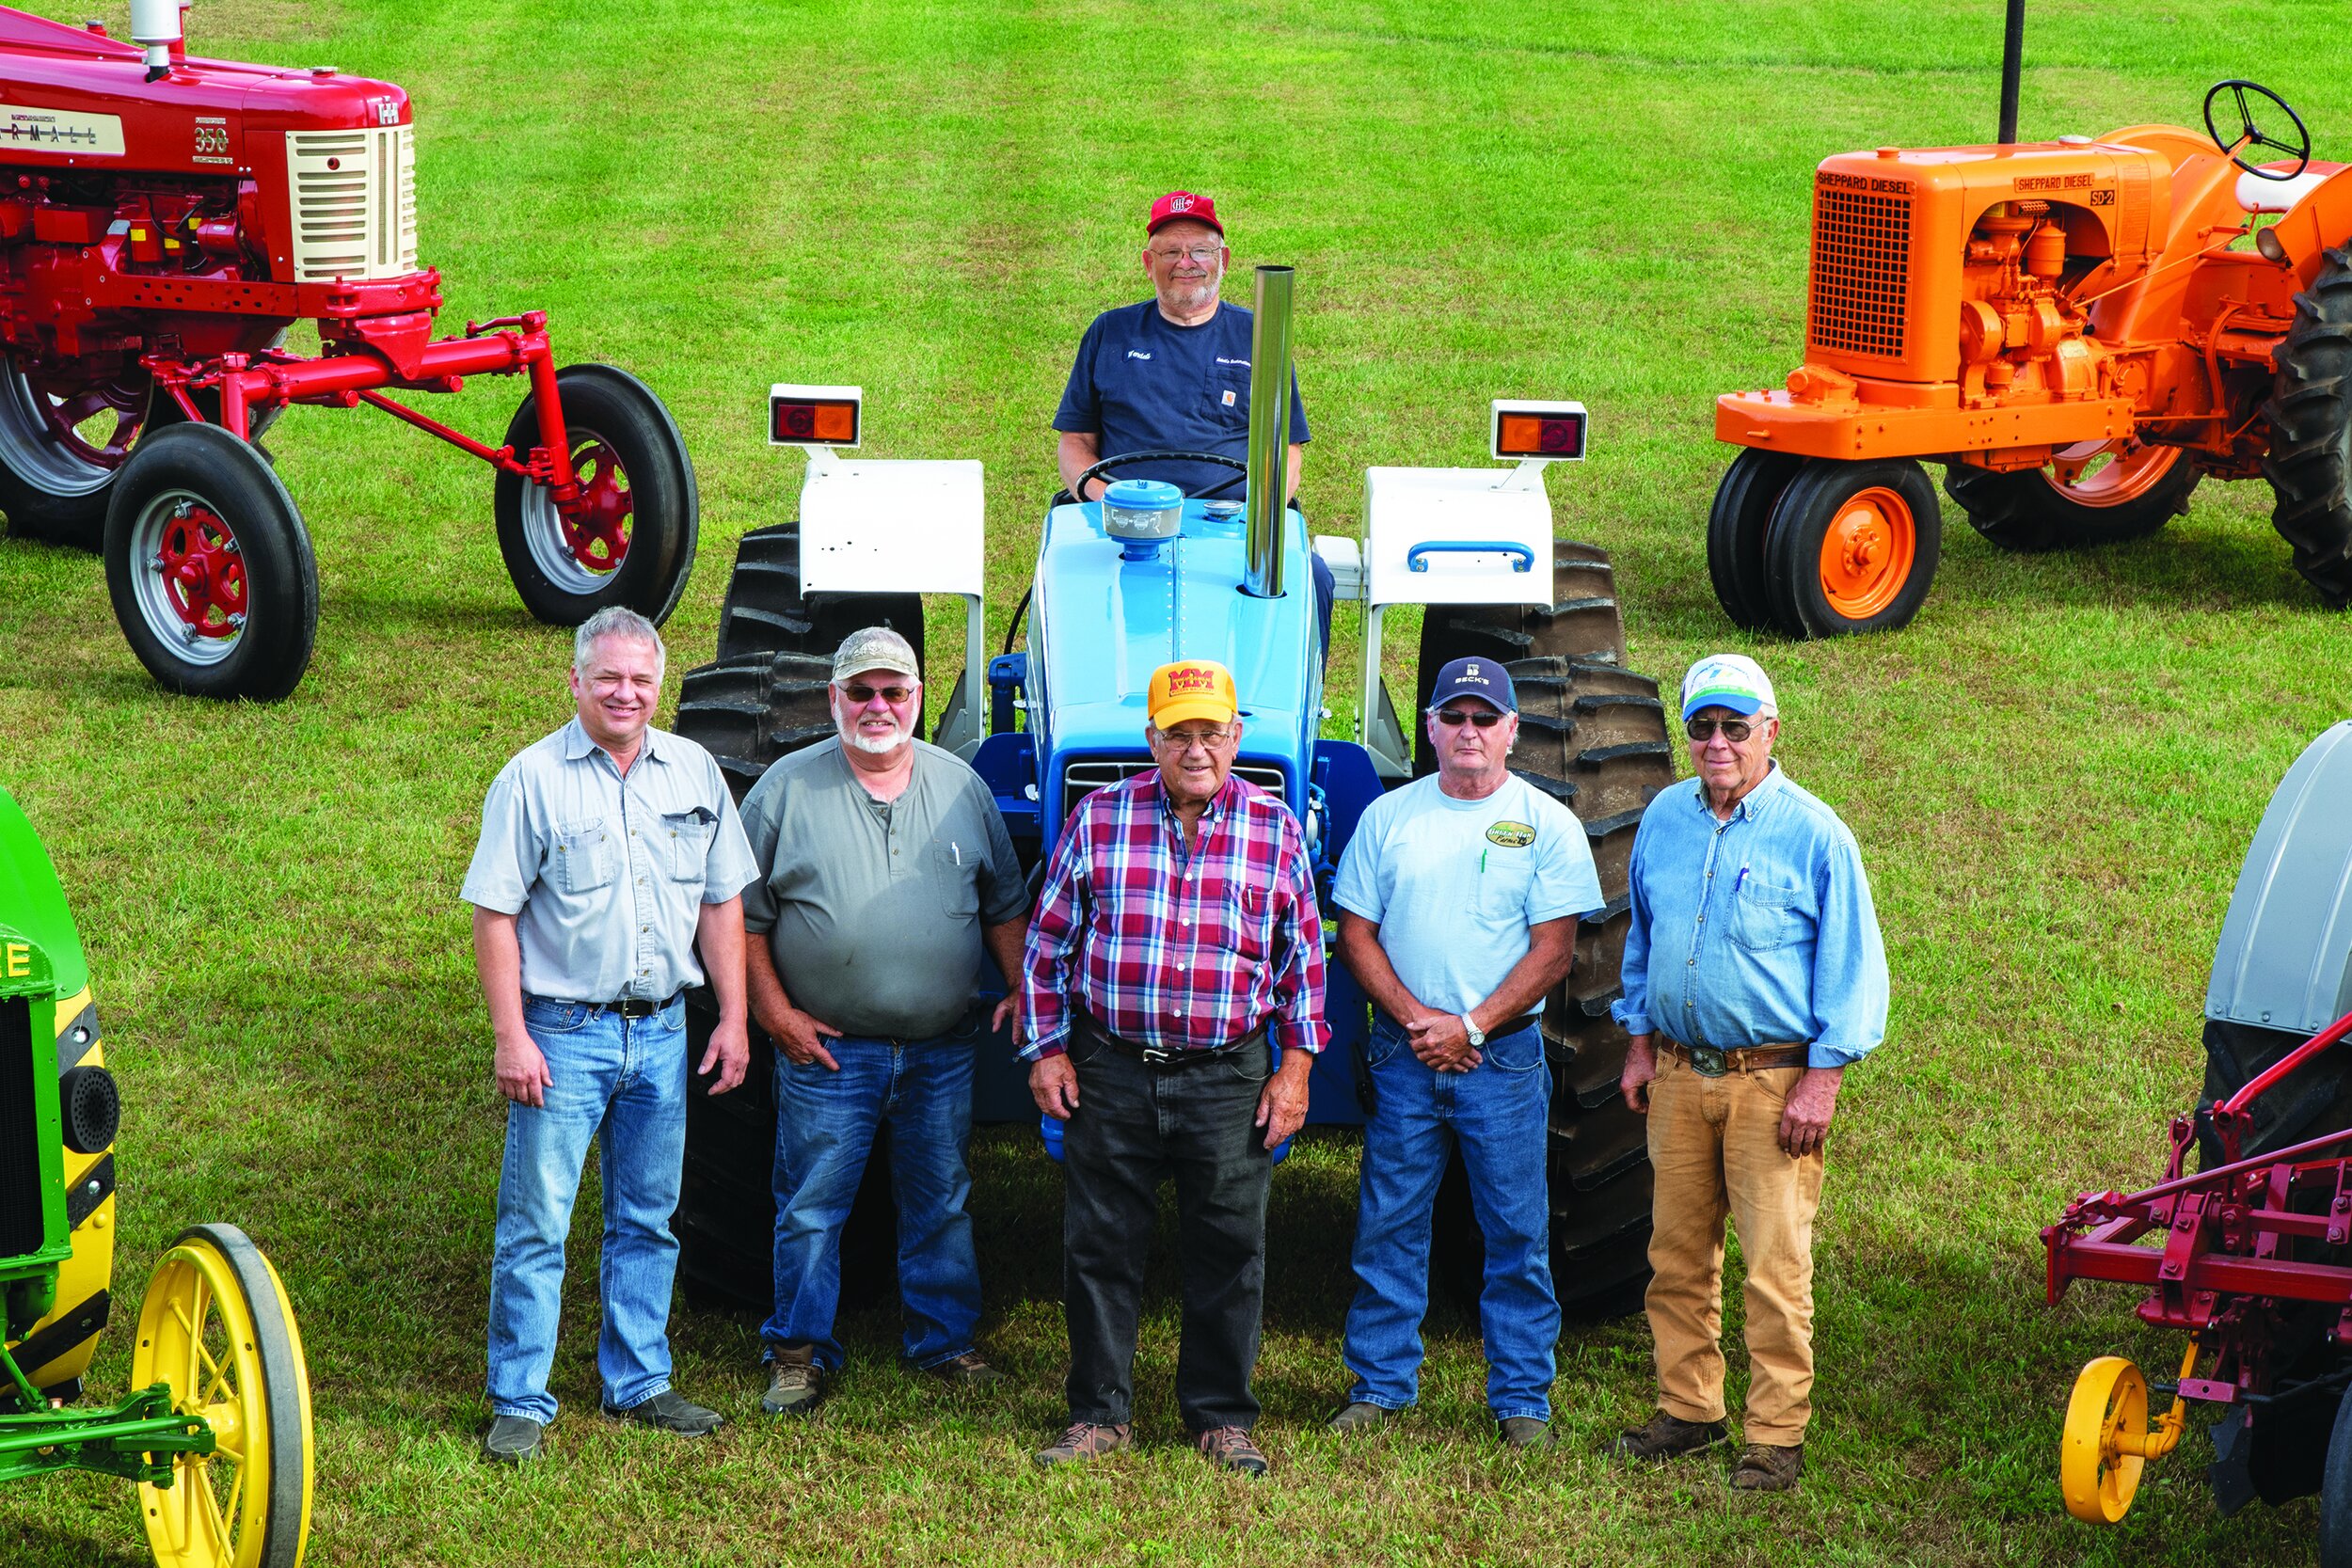  The tractor crew on “picture day” included, from left to right, Ron Poeppelman, Bob Rhoades, John Berger, Nelson Ashbaugh, and Don Marchal. Wendell Kelch is on the tractor. 